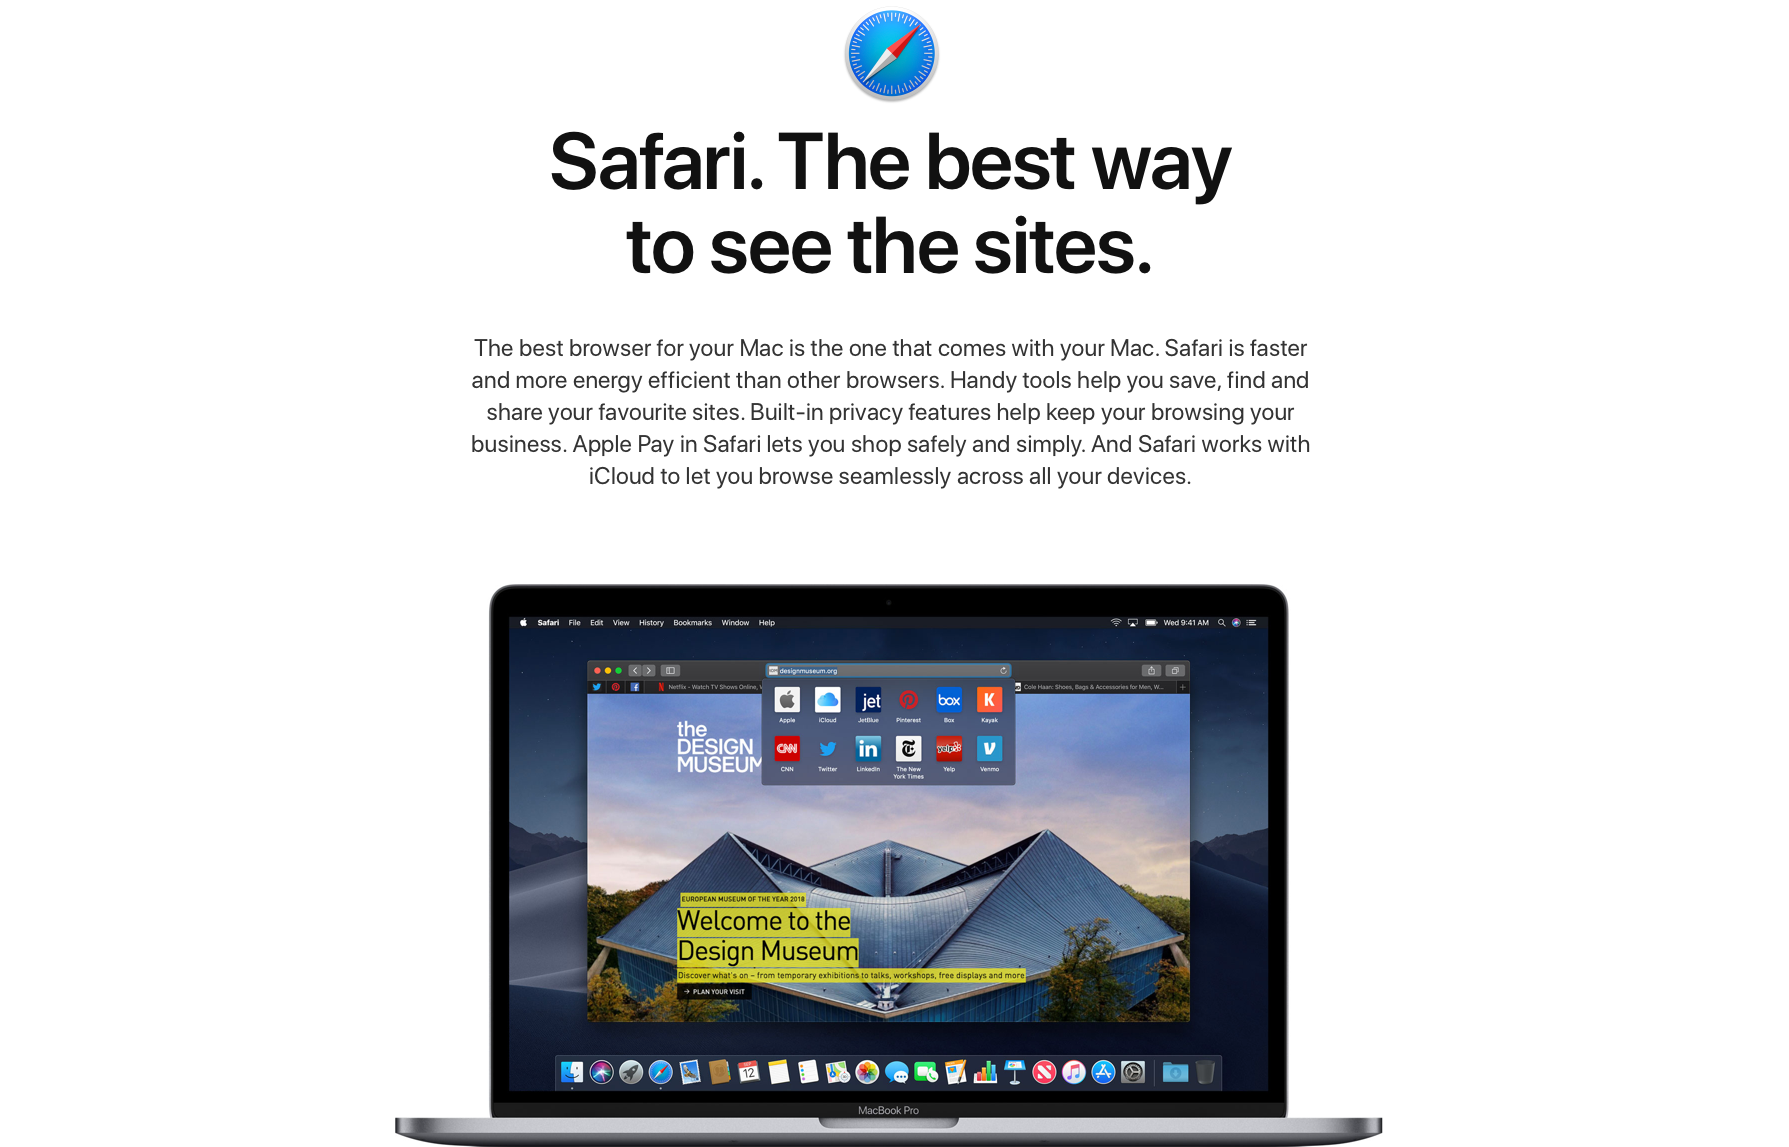 Introducing a faster, easier checkout experience with our new browser extension  for Safari!